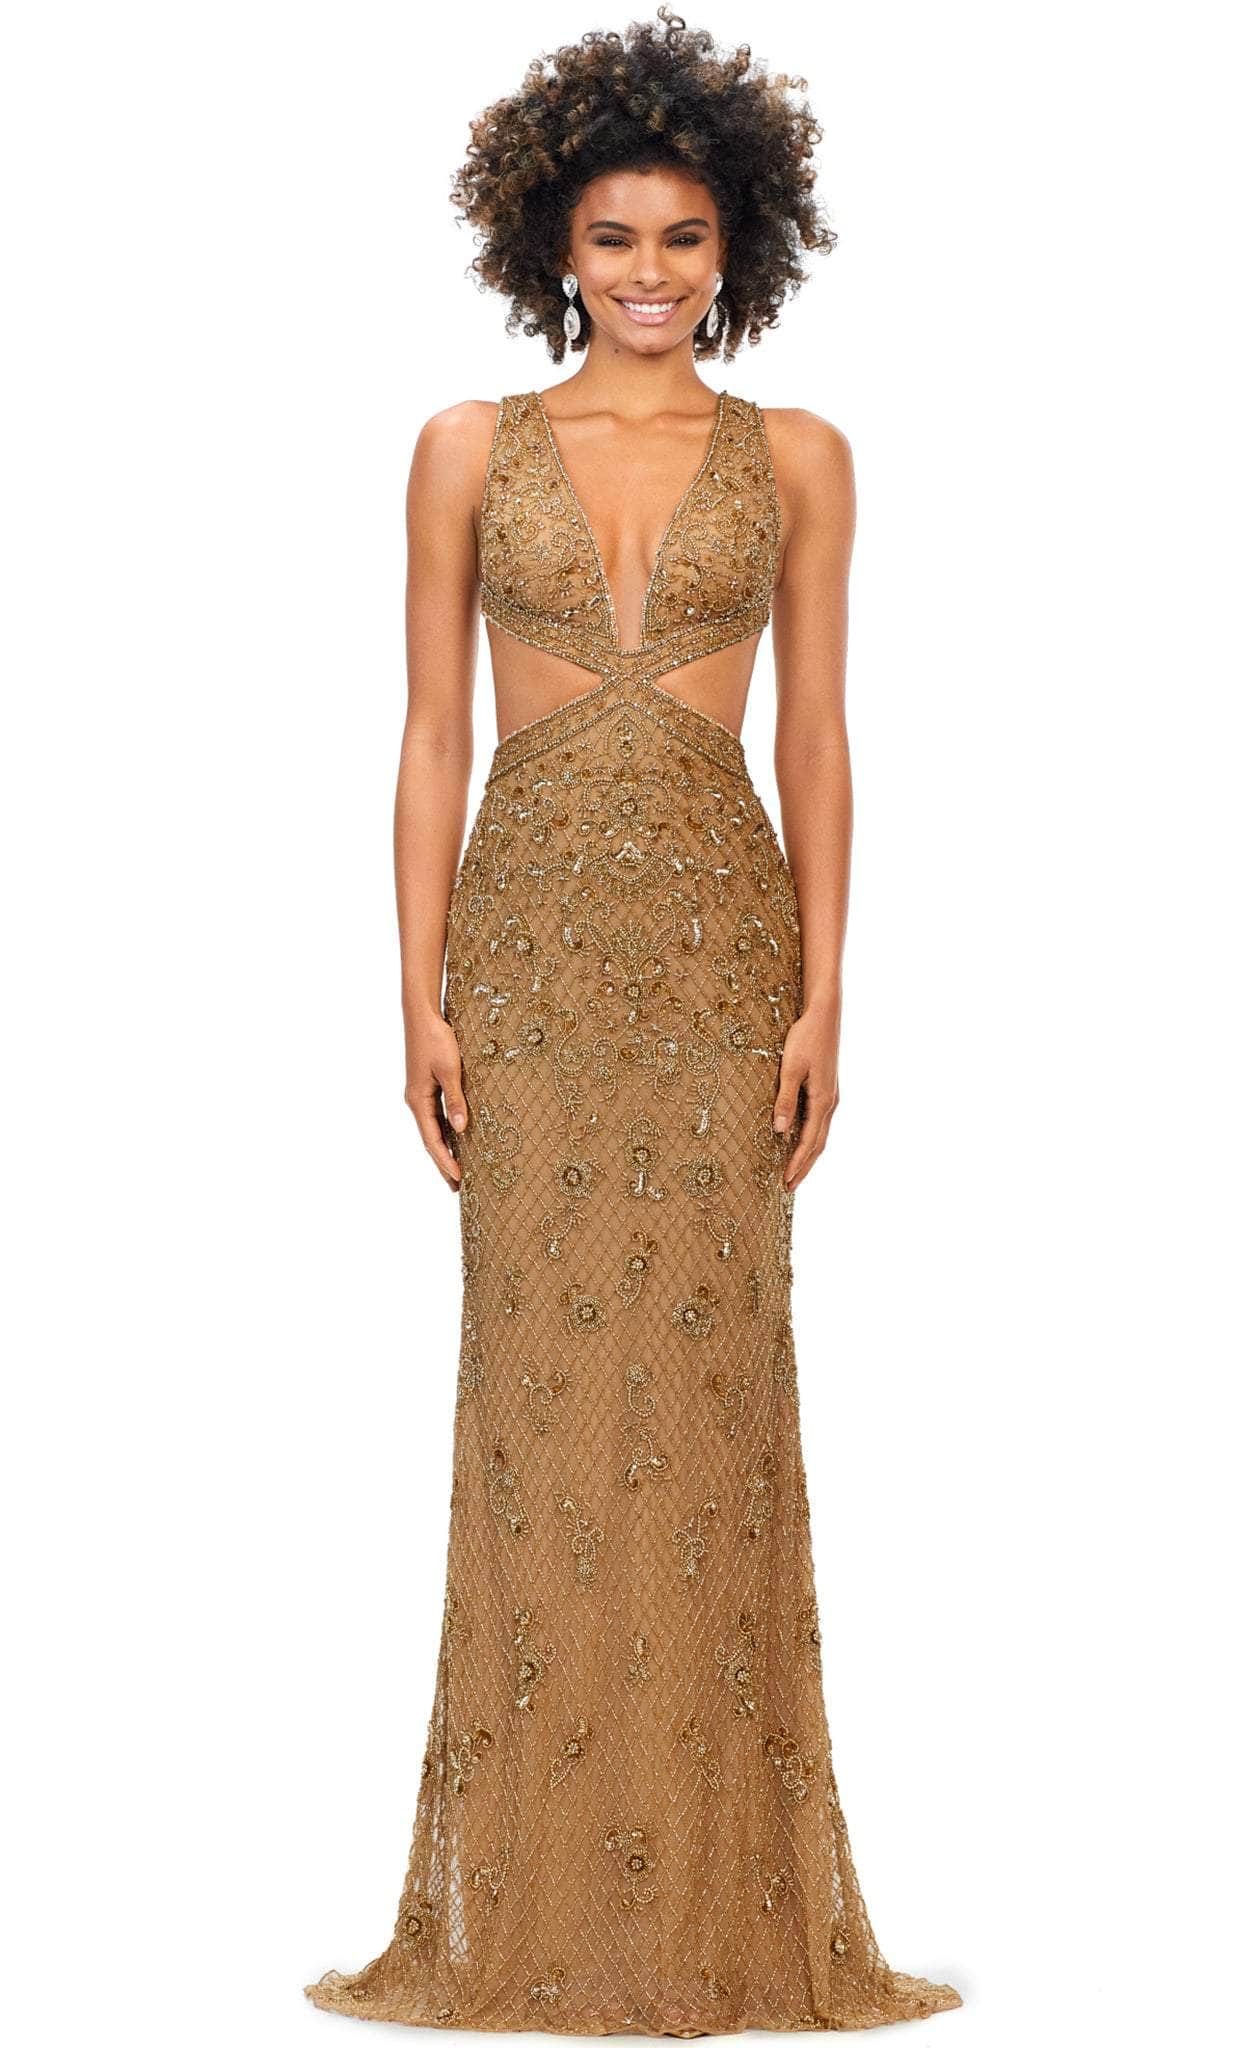 Image of Ashley Lauren 11366 - Sleeveless With Cut-Outs Evening Gown